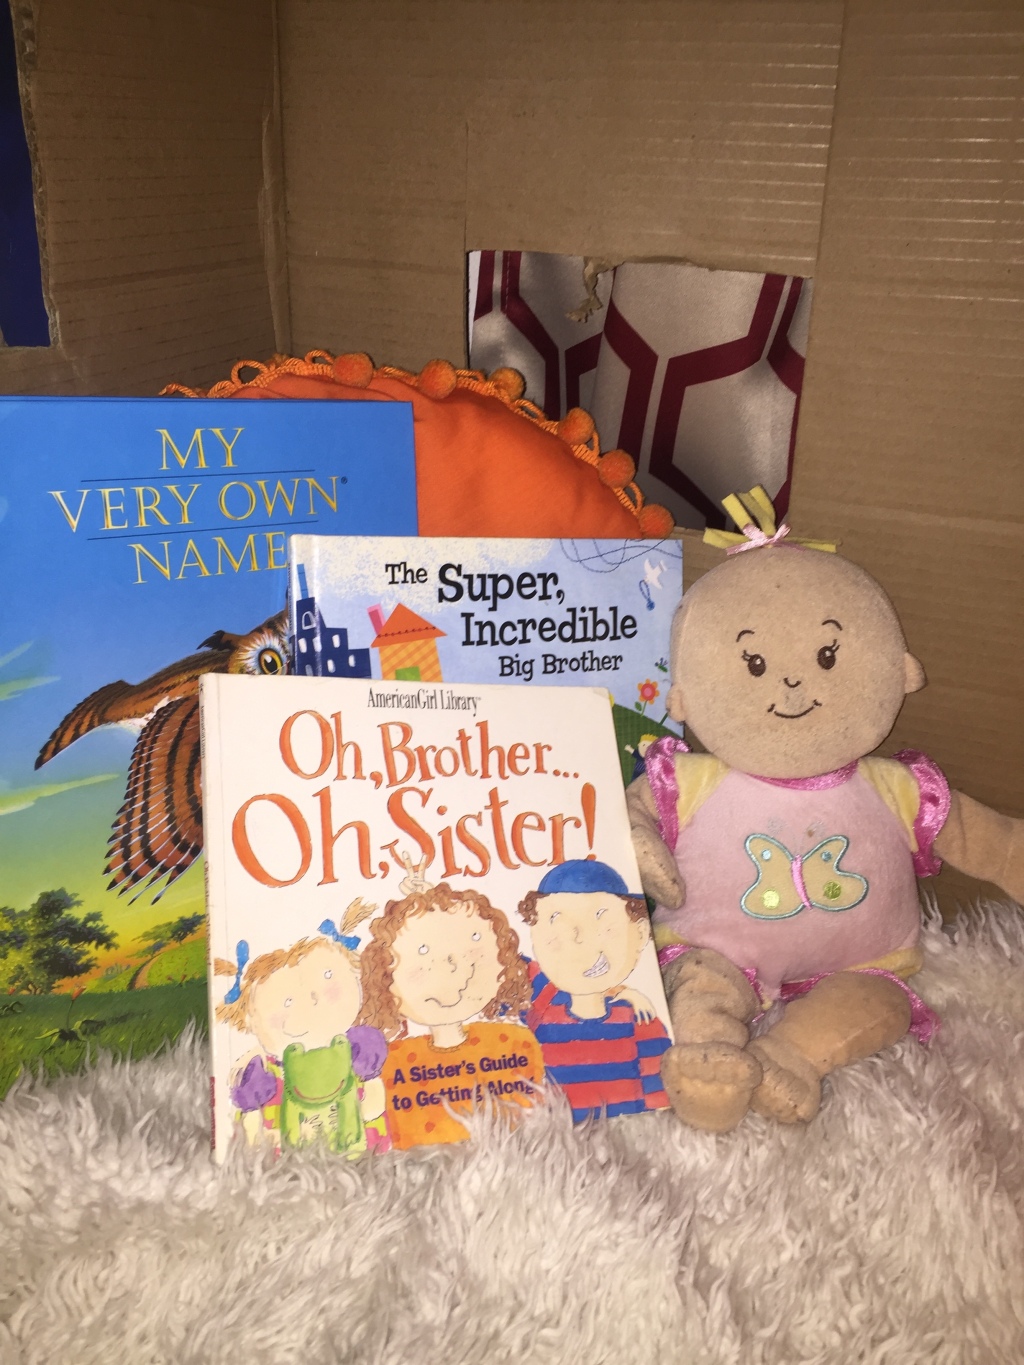 gifts for siblings My Very Own Name book, The Super Incredible Big Brother book, Oh Brother, Oh Sister book, Baby Stella doll inside cardboard box nook hangout